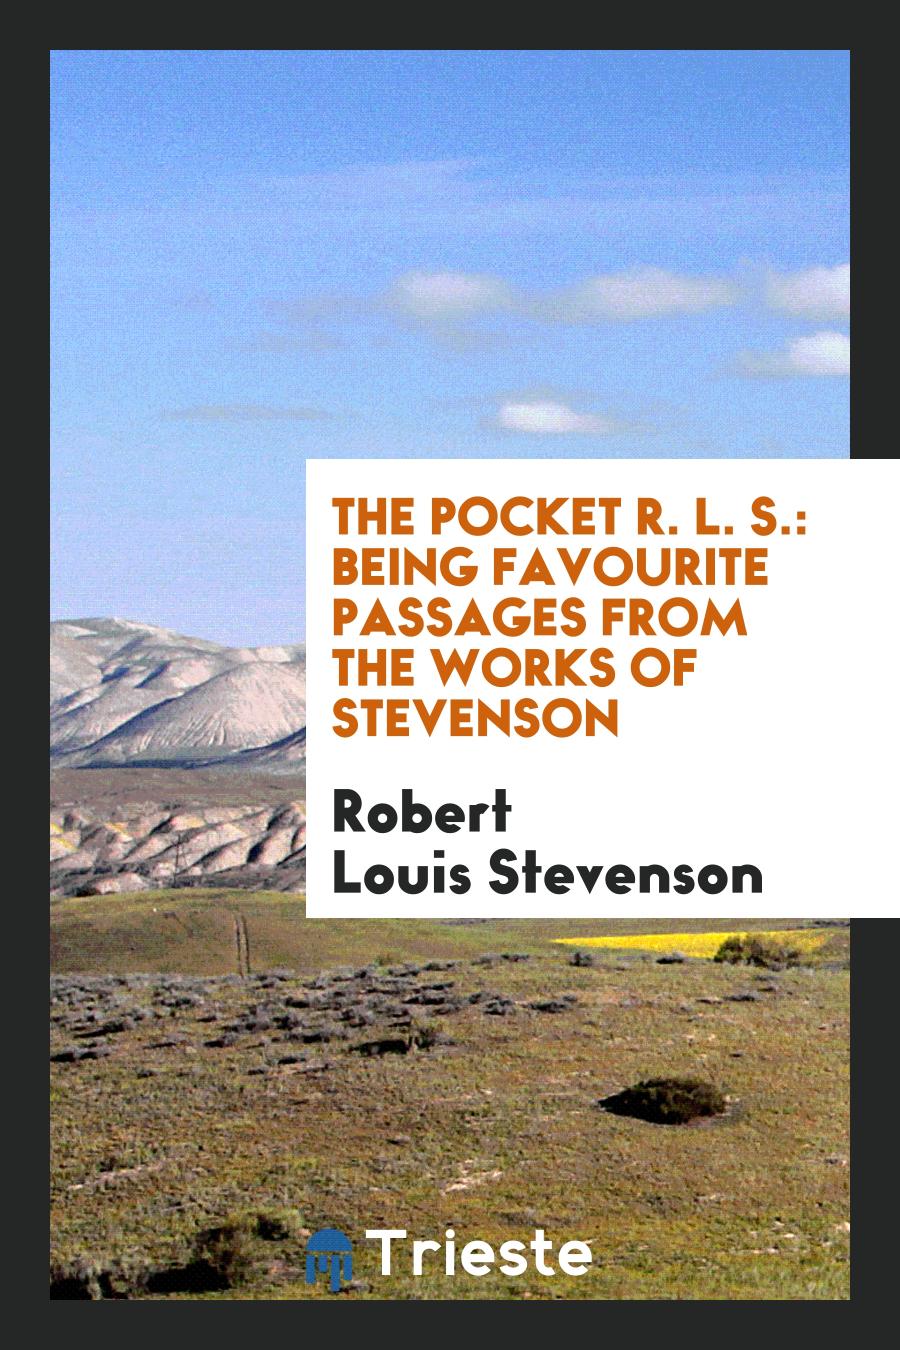 The pocket R. L. S.: being favourite passages from the works of Stevenson